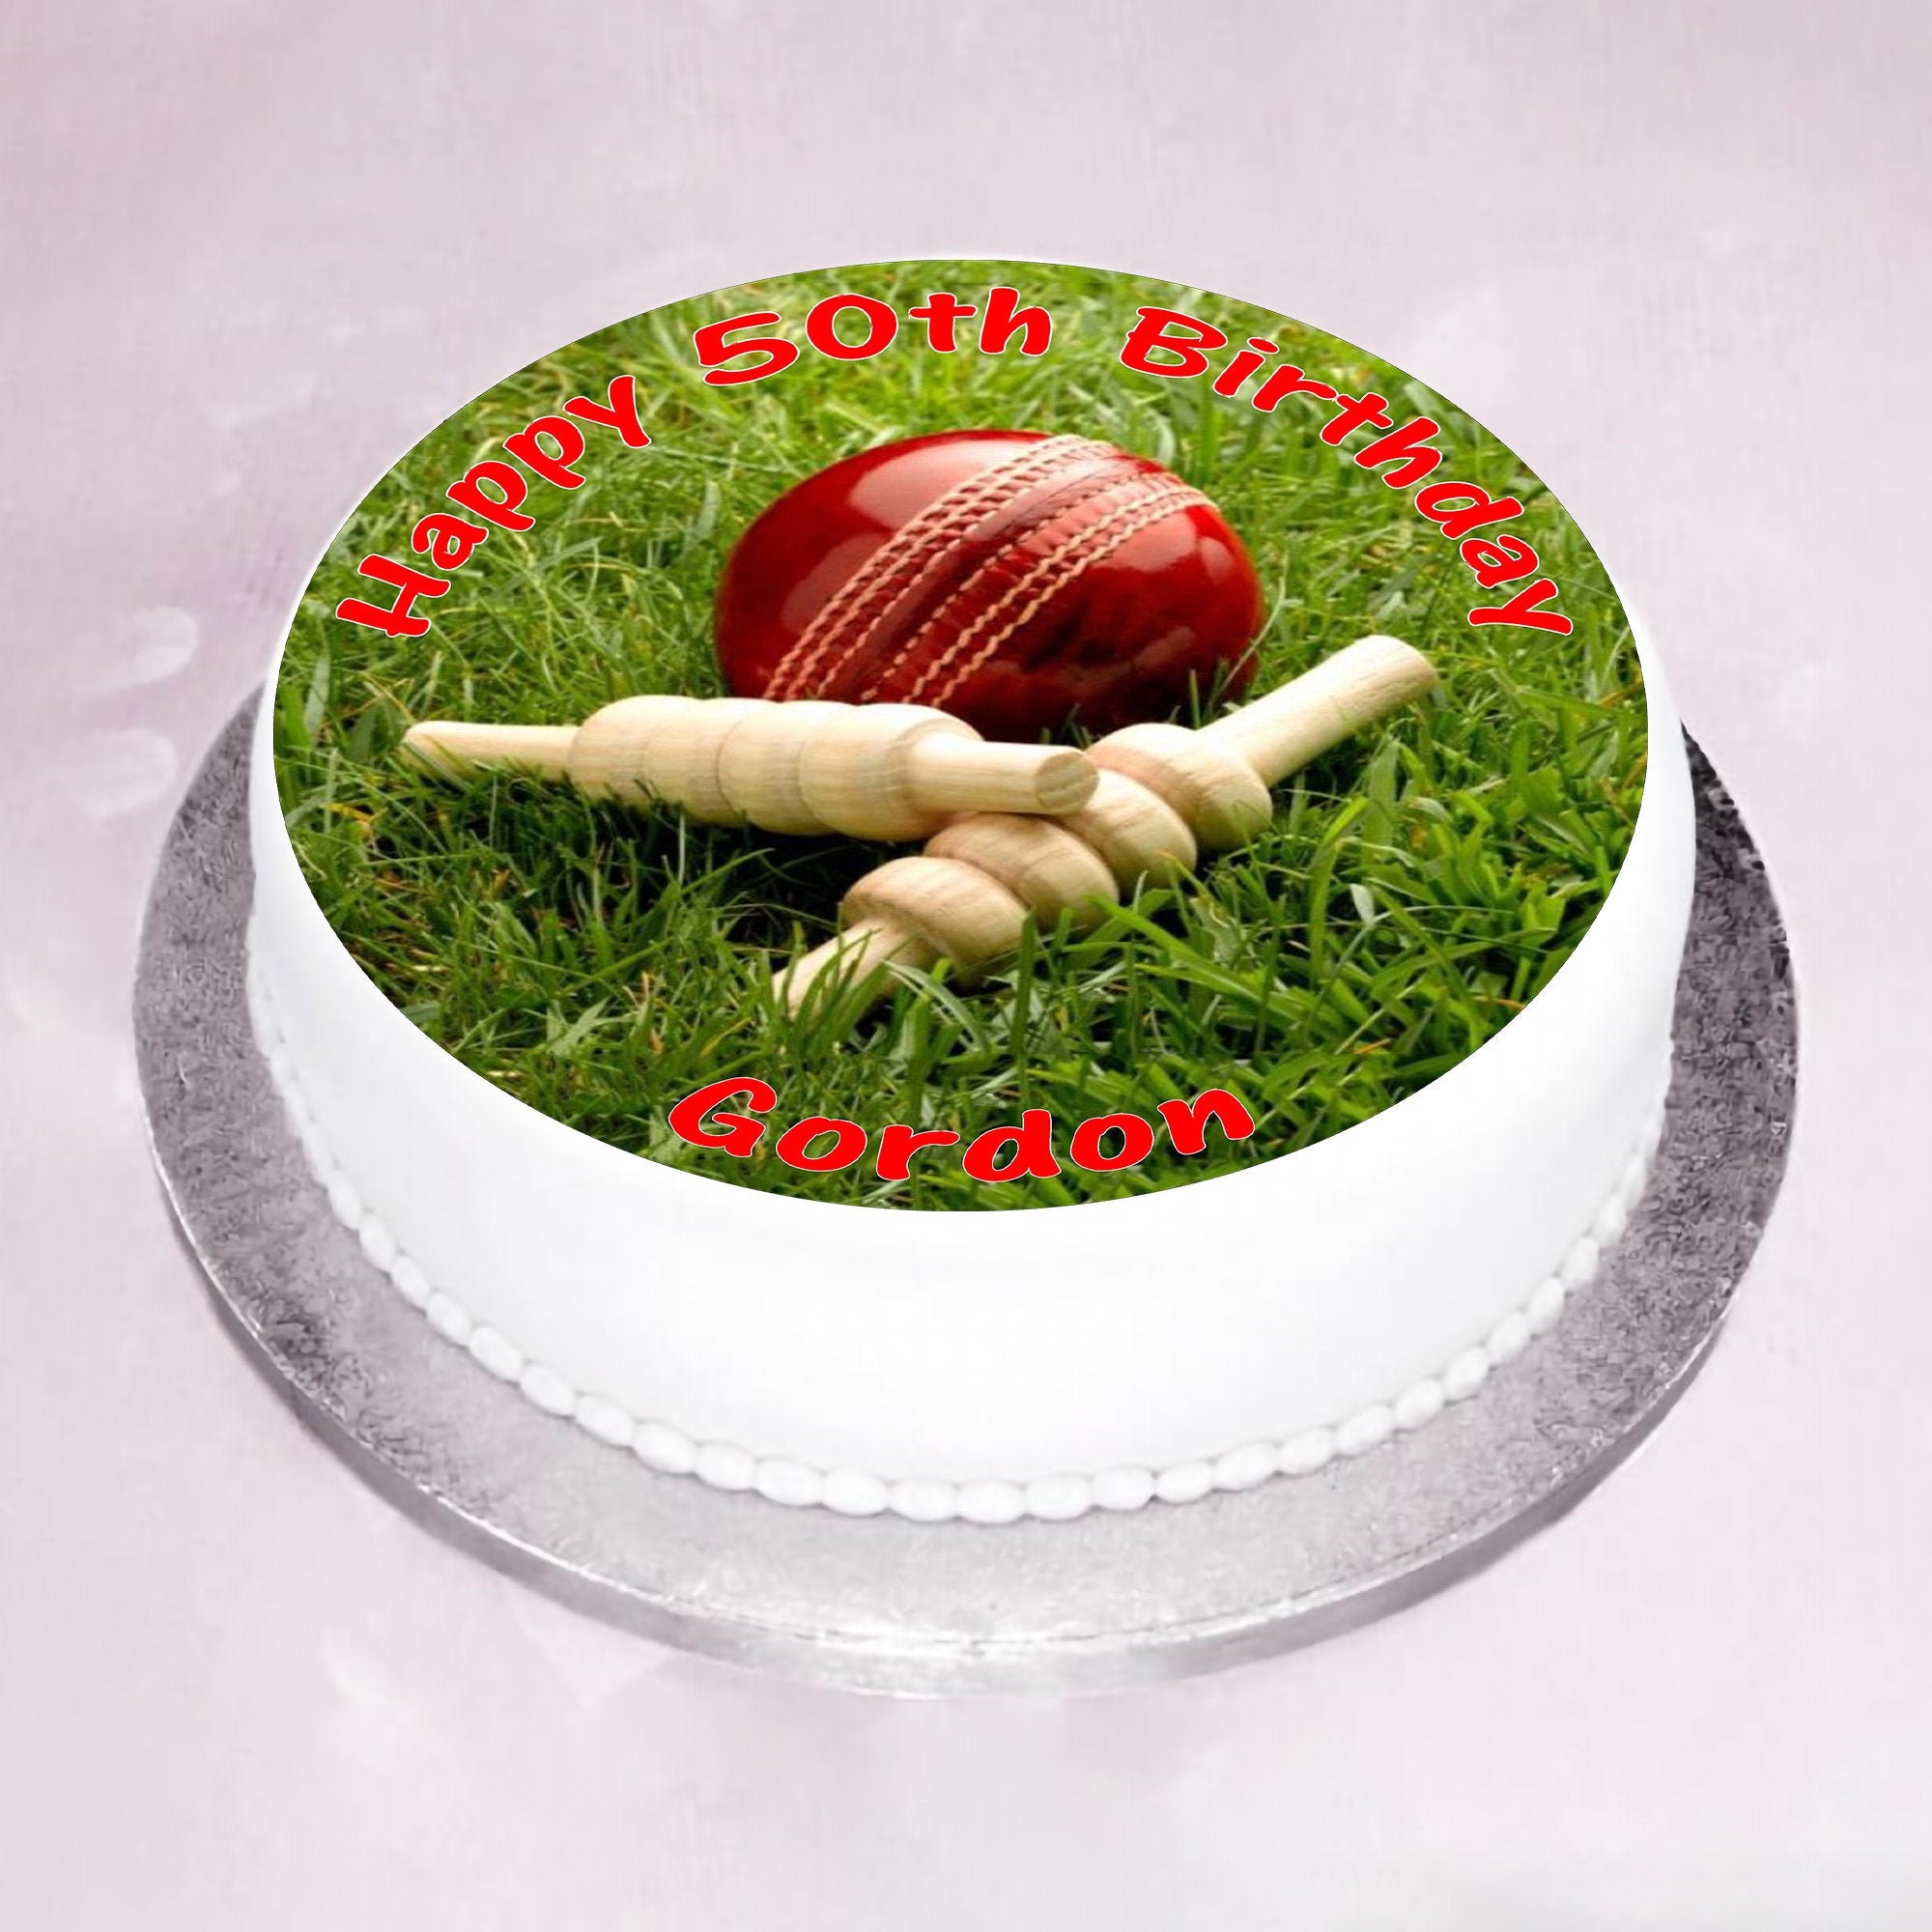 Cricket PERSONALISED EDIBLE 7.5" Diameter Icing Cake Wrapper Toppers Round